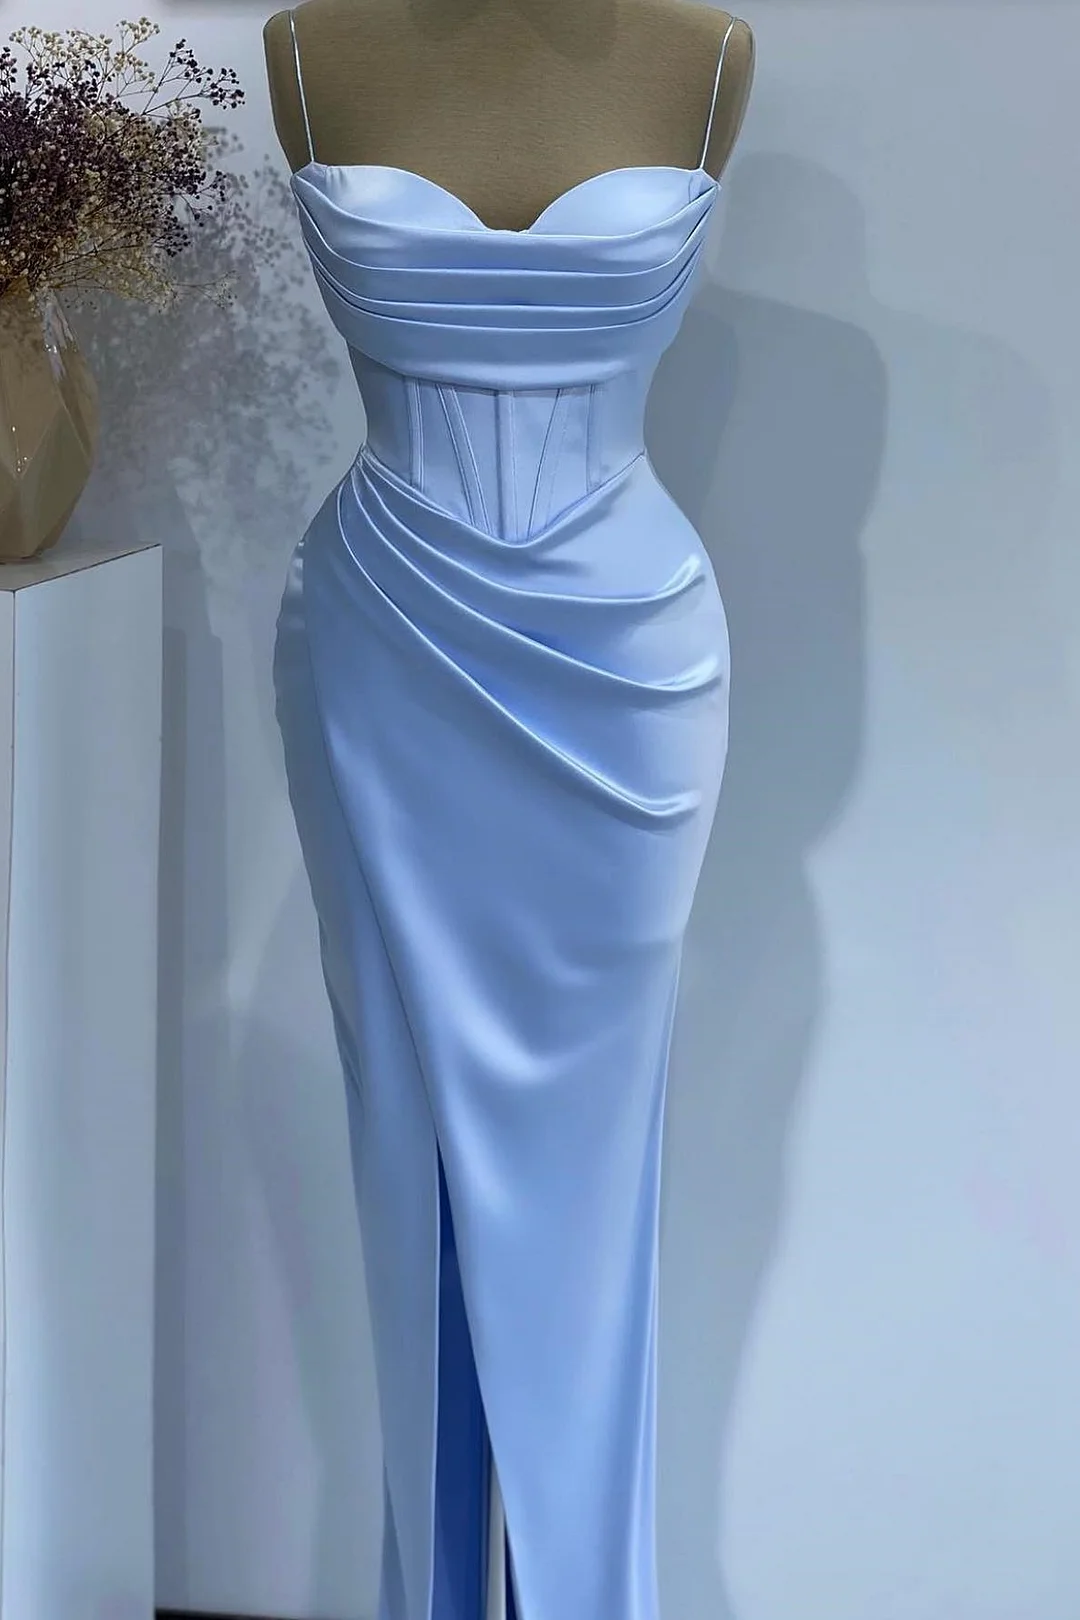 Baby Blue Mermaid Sweetheart Prom Dress With Spaghetti-Straps Online ED0318